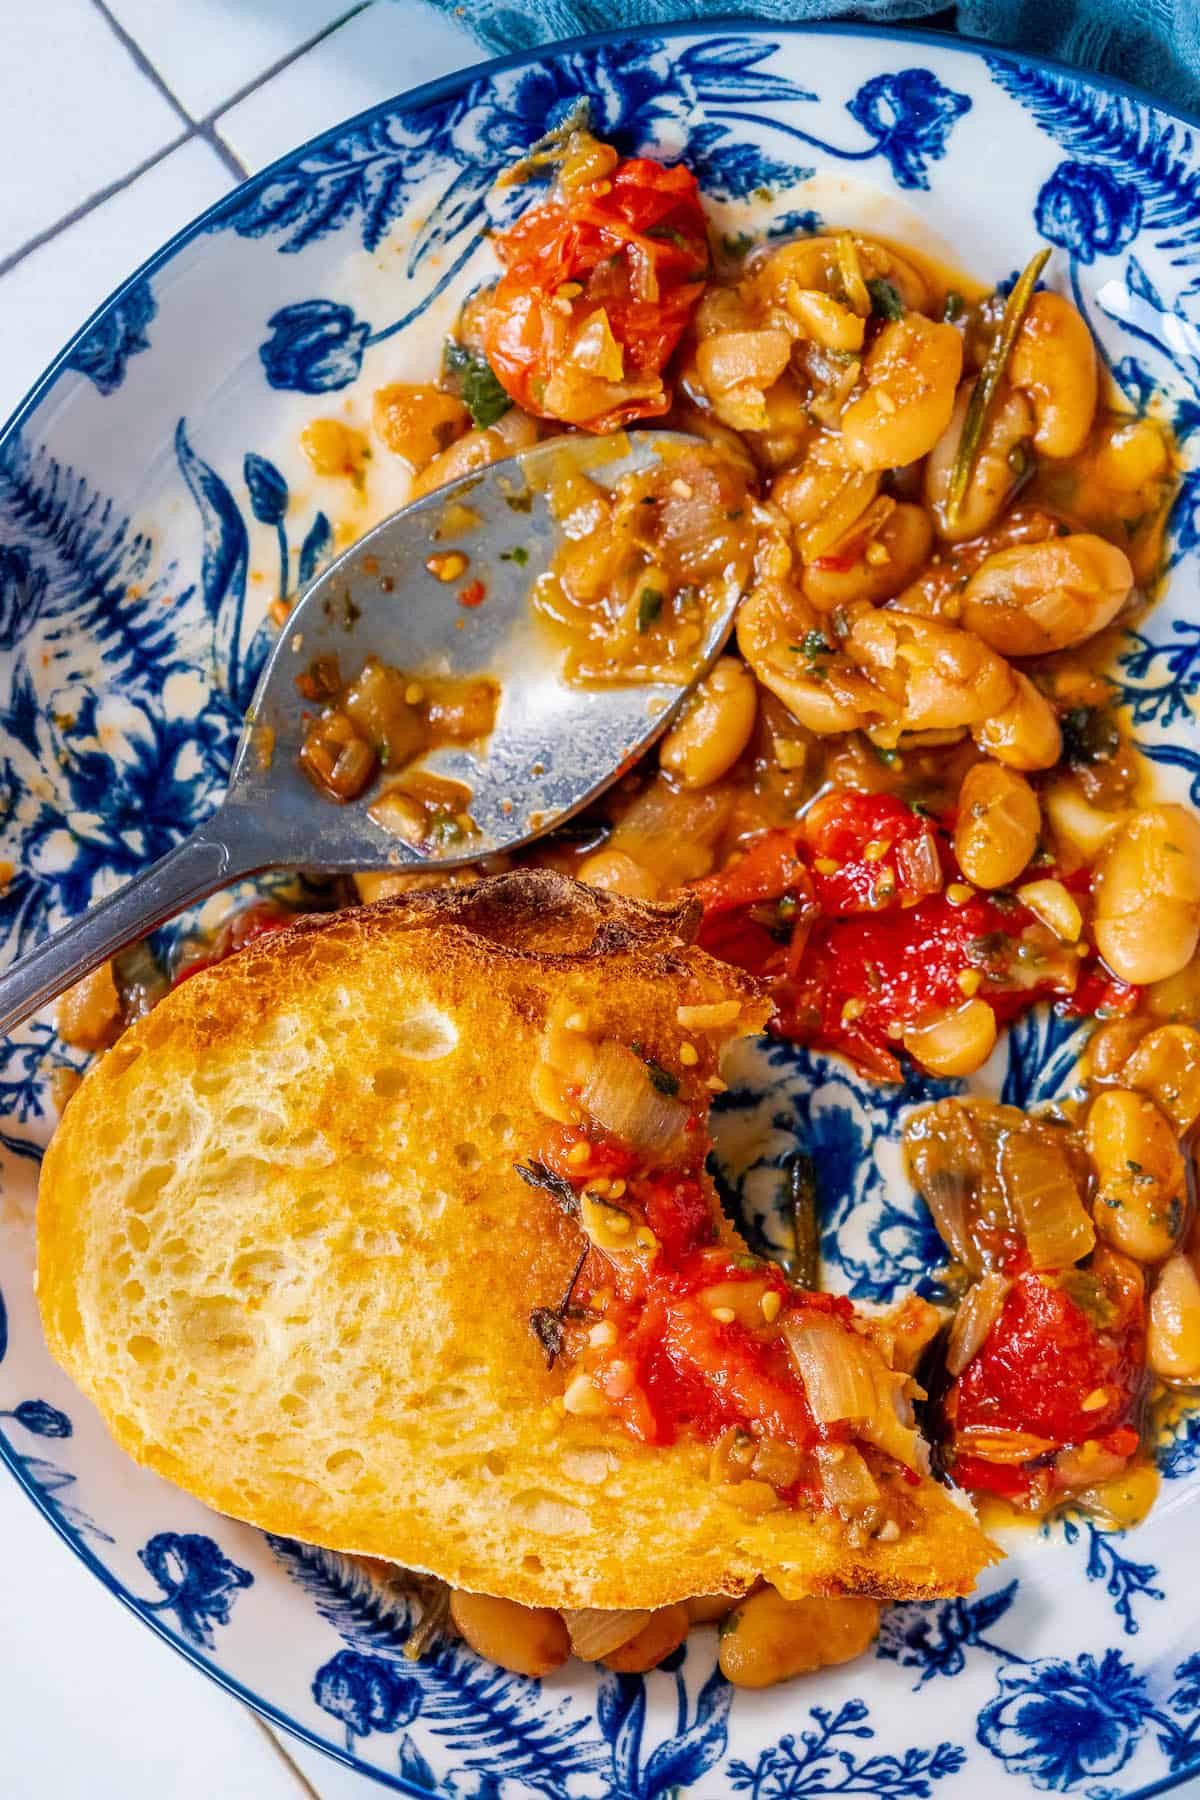 An SEO-optimized plate featuring flavorful white beans alongside vibrant tomatoes.